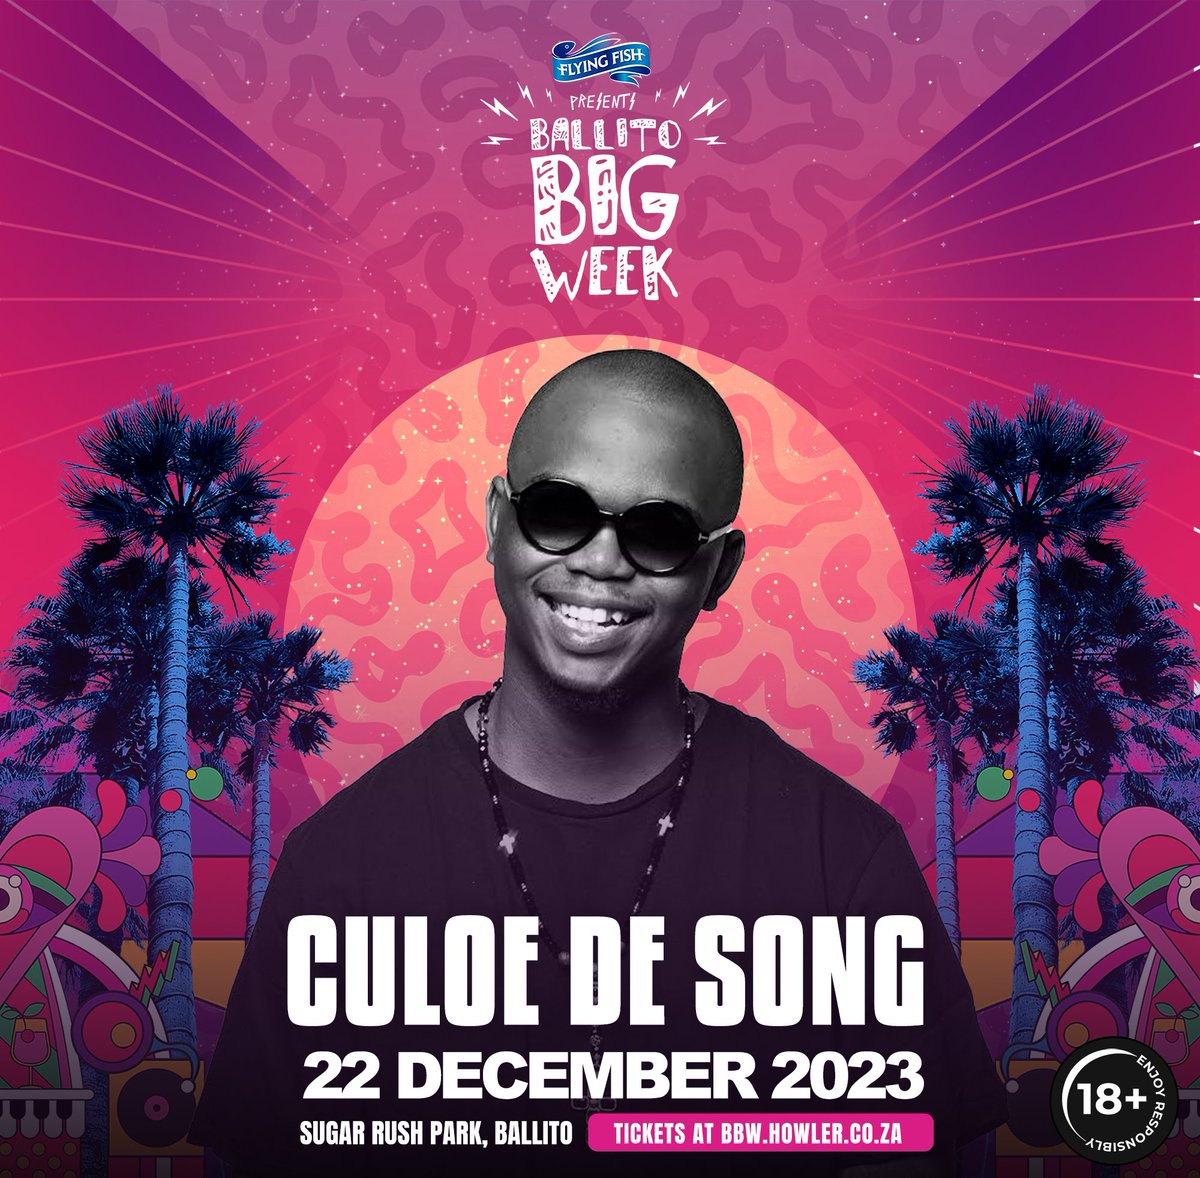 Experience the magic of @CuloeDeSong’s music as he brings worlds together through sonic sounds😍🙌🏾 Mark your calendars and be part of a journey you’ll never forget!🔥 Tickets are available on this link 🔗 : bbw.howler.co.za #BallitoBIGWeek #MaziweKe #CuloeDeSong #Shimza